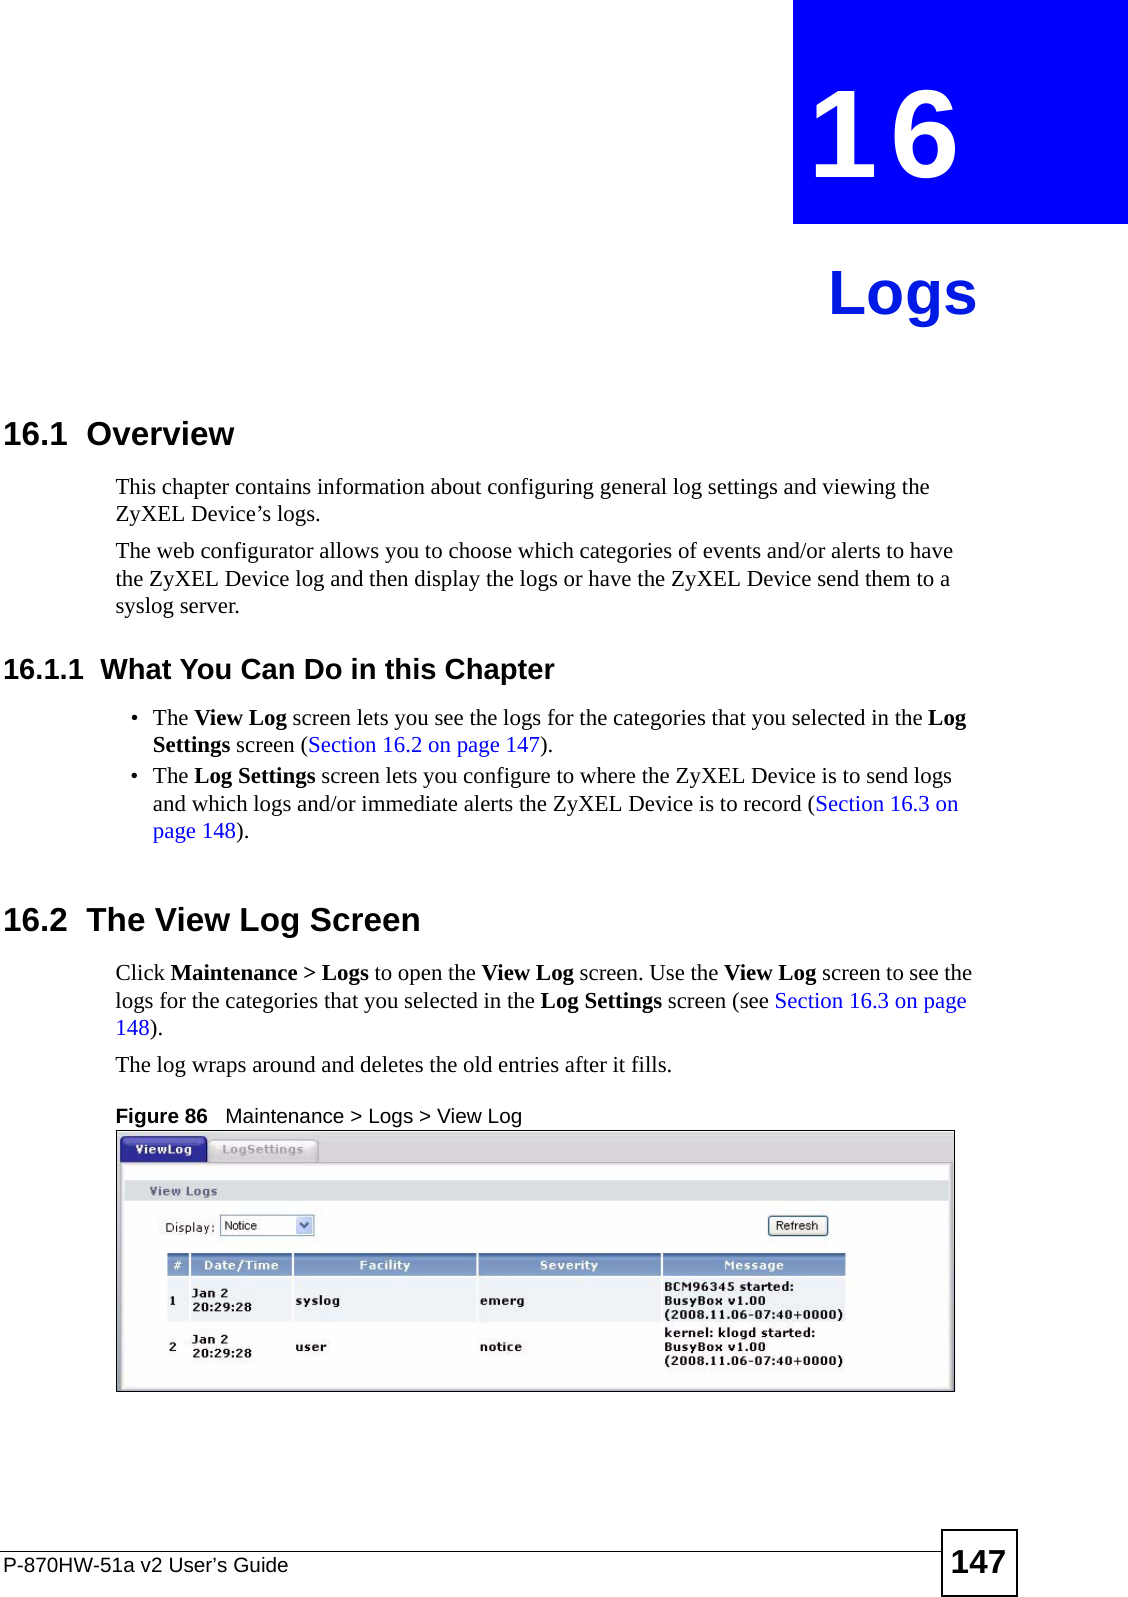 P-870HW-51a v2 User’s Guide 147CHAPTER  16 Logs16.1  Overview This chapter contains information about configuring general log settings and viewing the ZyXEL Device’s logs.The web configurator allows you to choose which categories of events and/or alerts to have the ZyXEL Device log and then display the logs or have the ZyXEL Device send them to a syslog server. 16.1.1  What You Can Do in this Chapter•The View Log screen lets you see the logs for the categories that you selected in the Log Settings screen (Section 16.2 on page 147).•The Log Settings screen lets you configure to where the ZyXEL Device is to send logs and which logs and/or immediate alerts the ZyXEL Device is to record (Section 16.3 on page 148).16.2  The View Log ScreenClick Maintenance &gt; Logs to open the View Log screen. Use the View Log screen to see the logs for the categories that you selected in the Log Settings screen (see Section 16.3 on page 148). The log wraps around and deletes the old entries after it fills.Figure 86   Maintenance &gt; Logs &gt; View Log